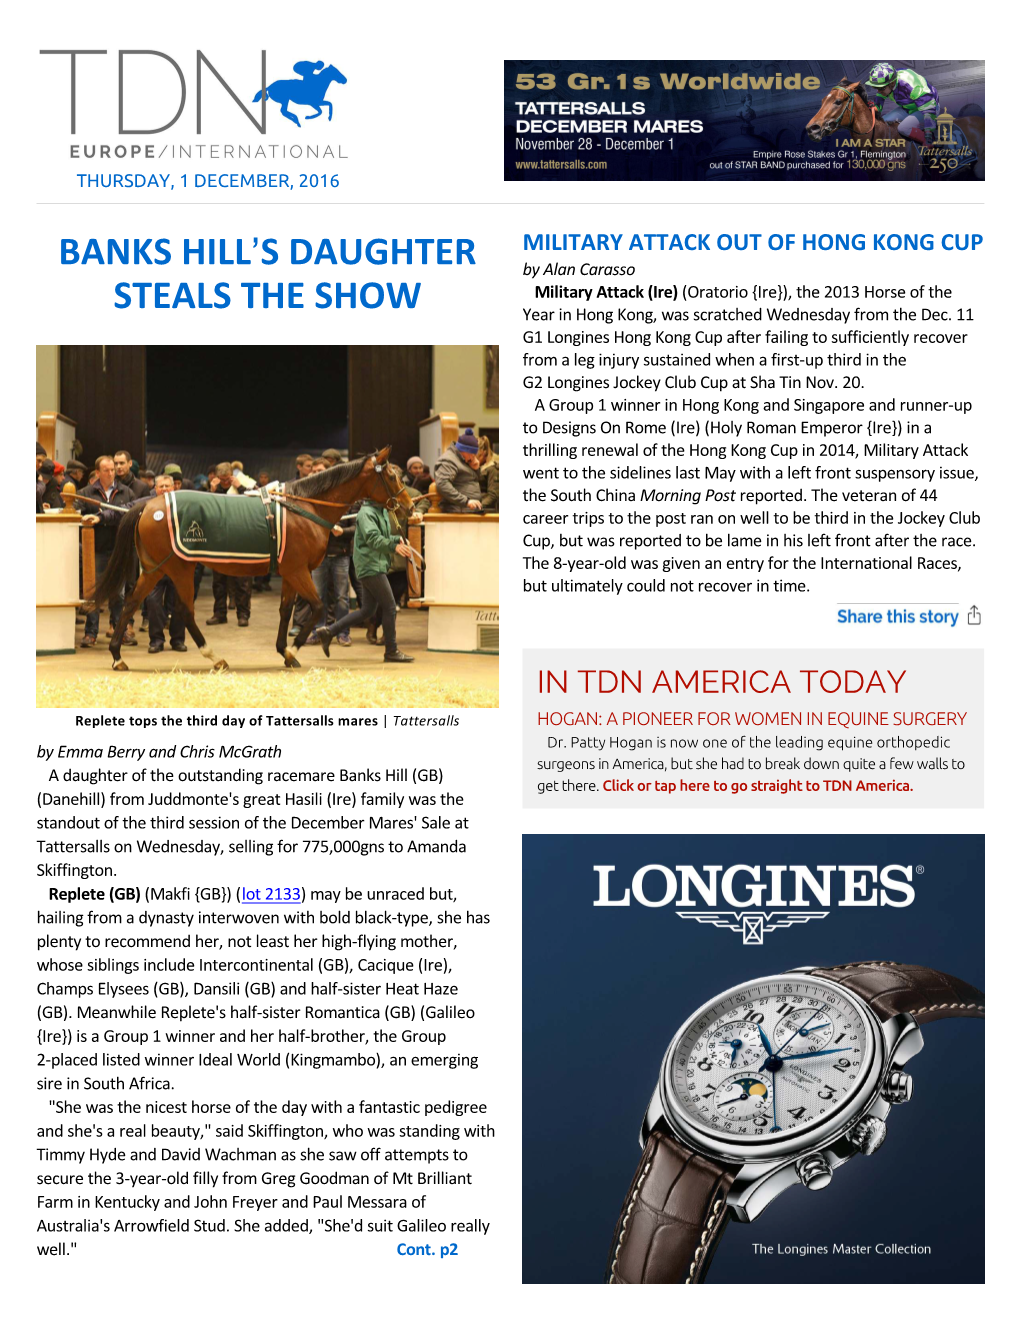 Banks Hill=S Daughter Steals the Show Cont